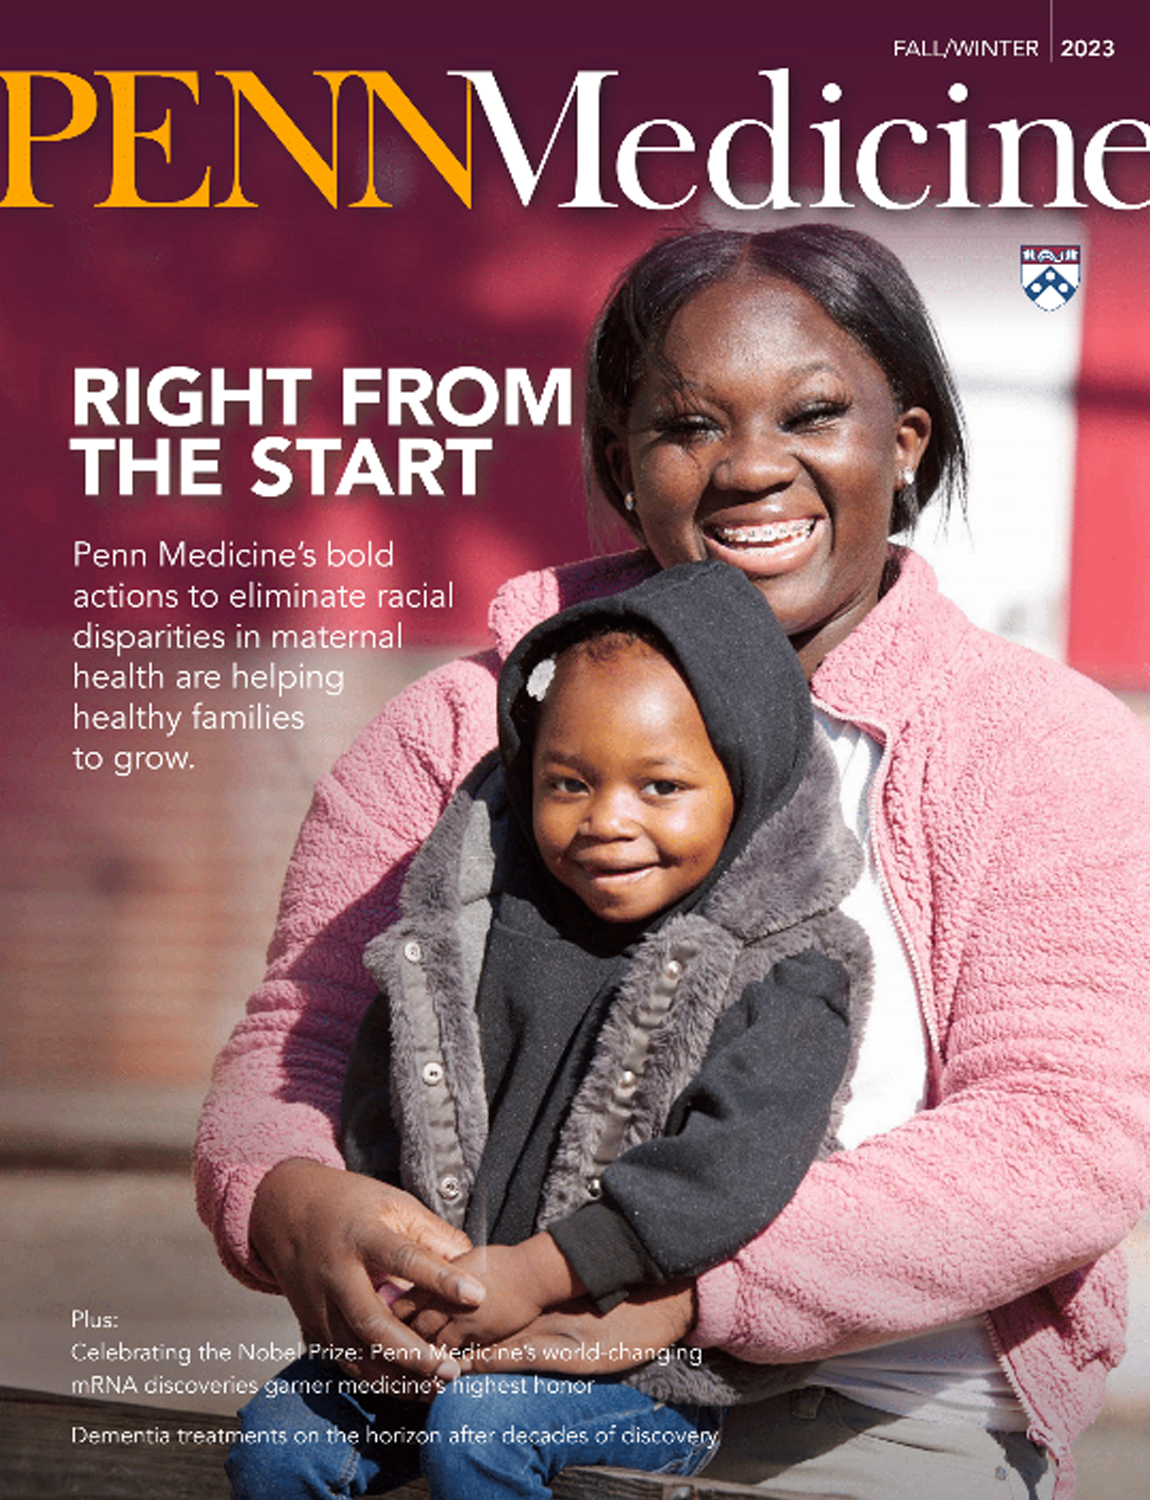 The cover of Penn Medicine Magazine, Fall and Winter 2023 issue, depicting a mother holding her child.